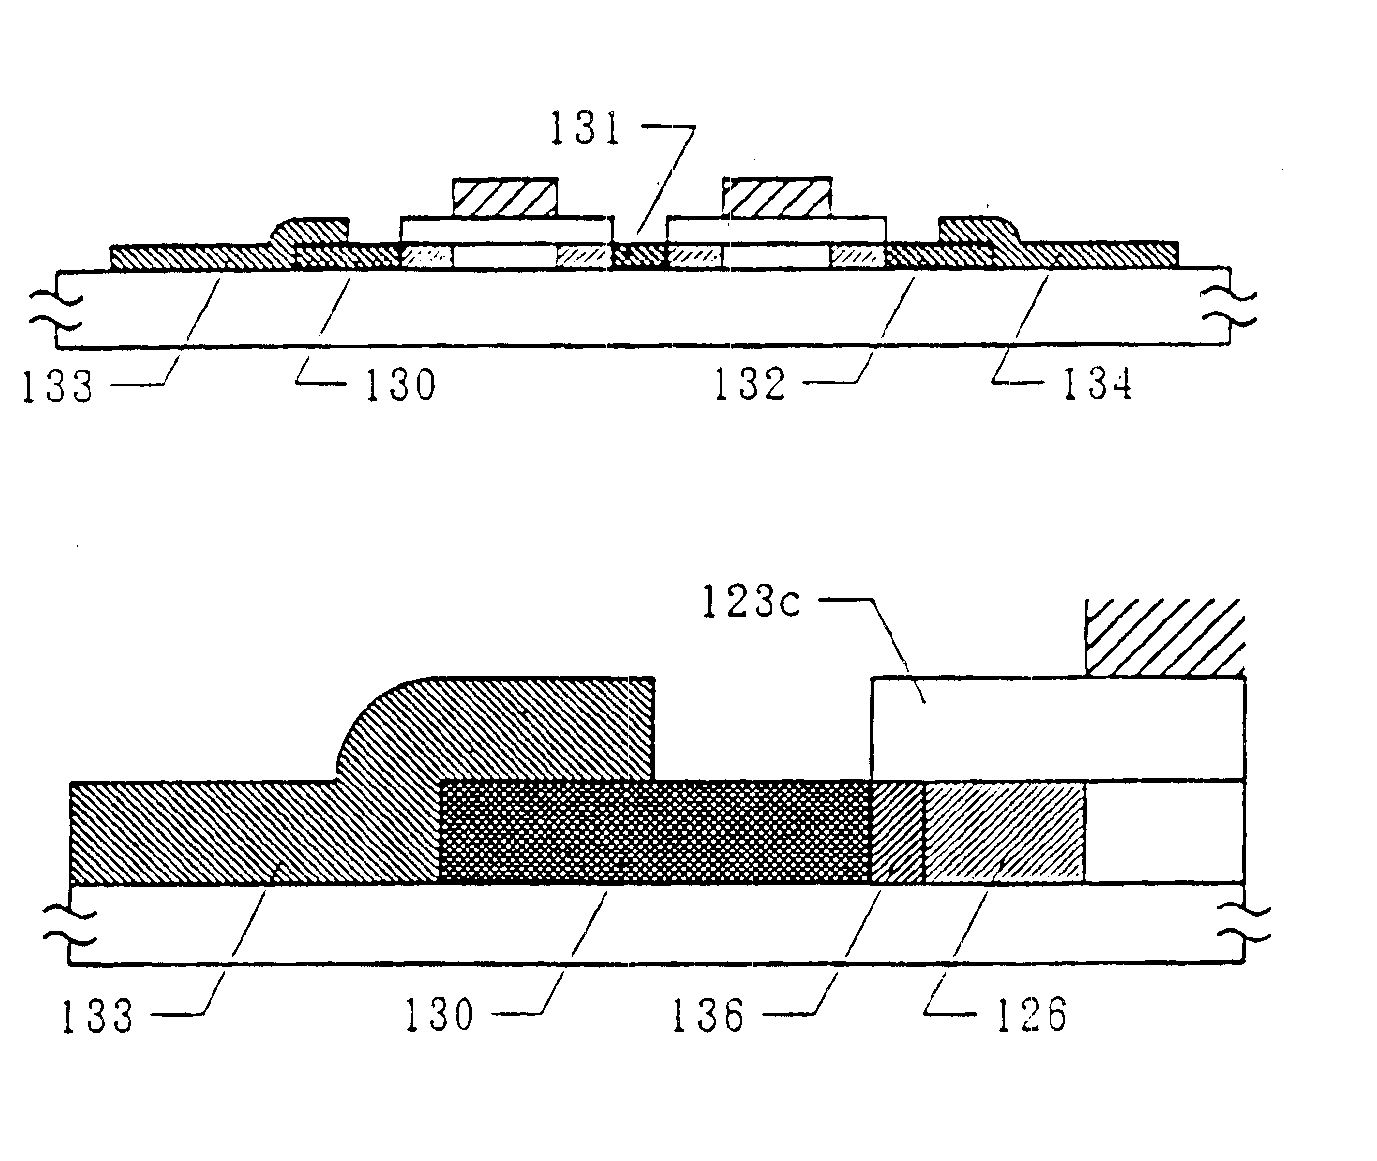 Semiconductor device that include silicide layers